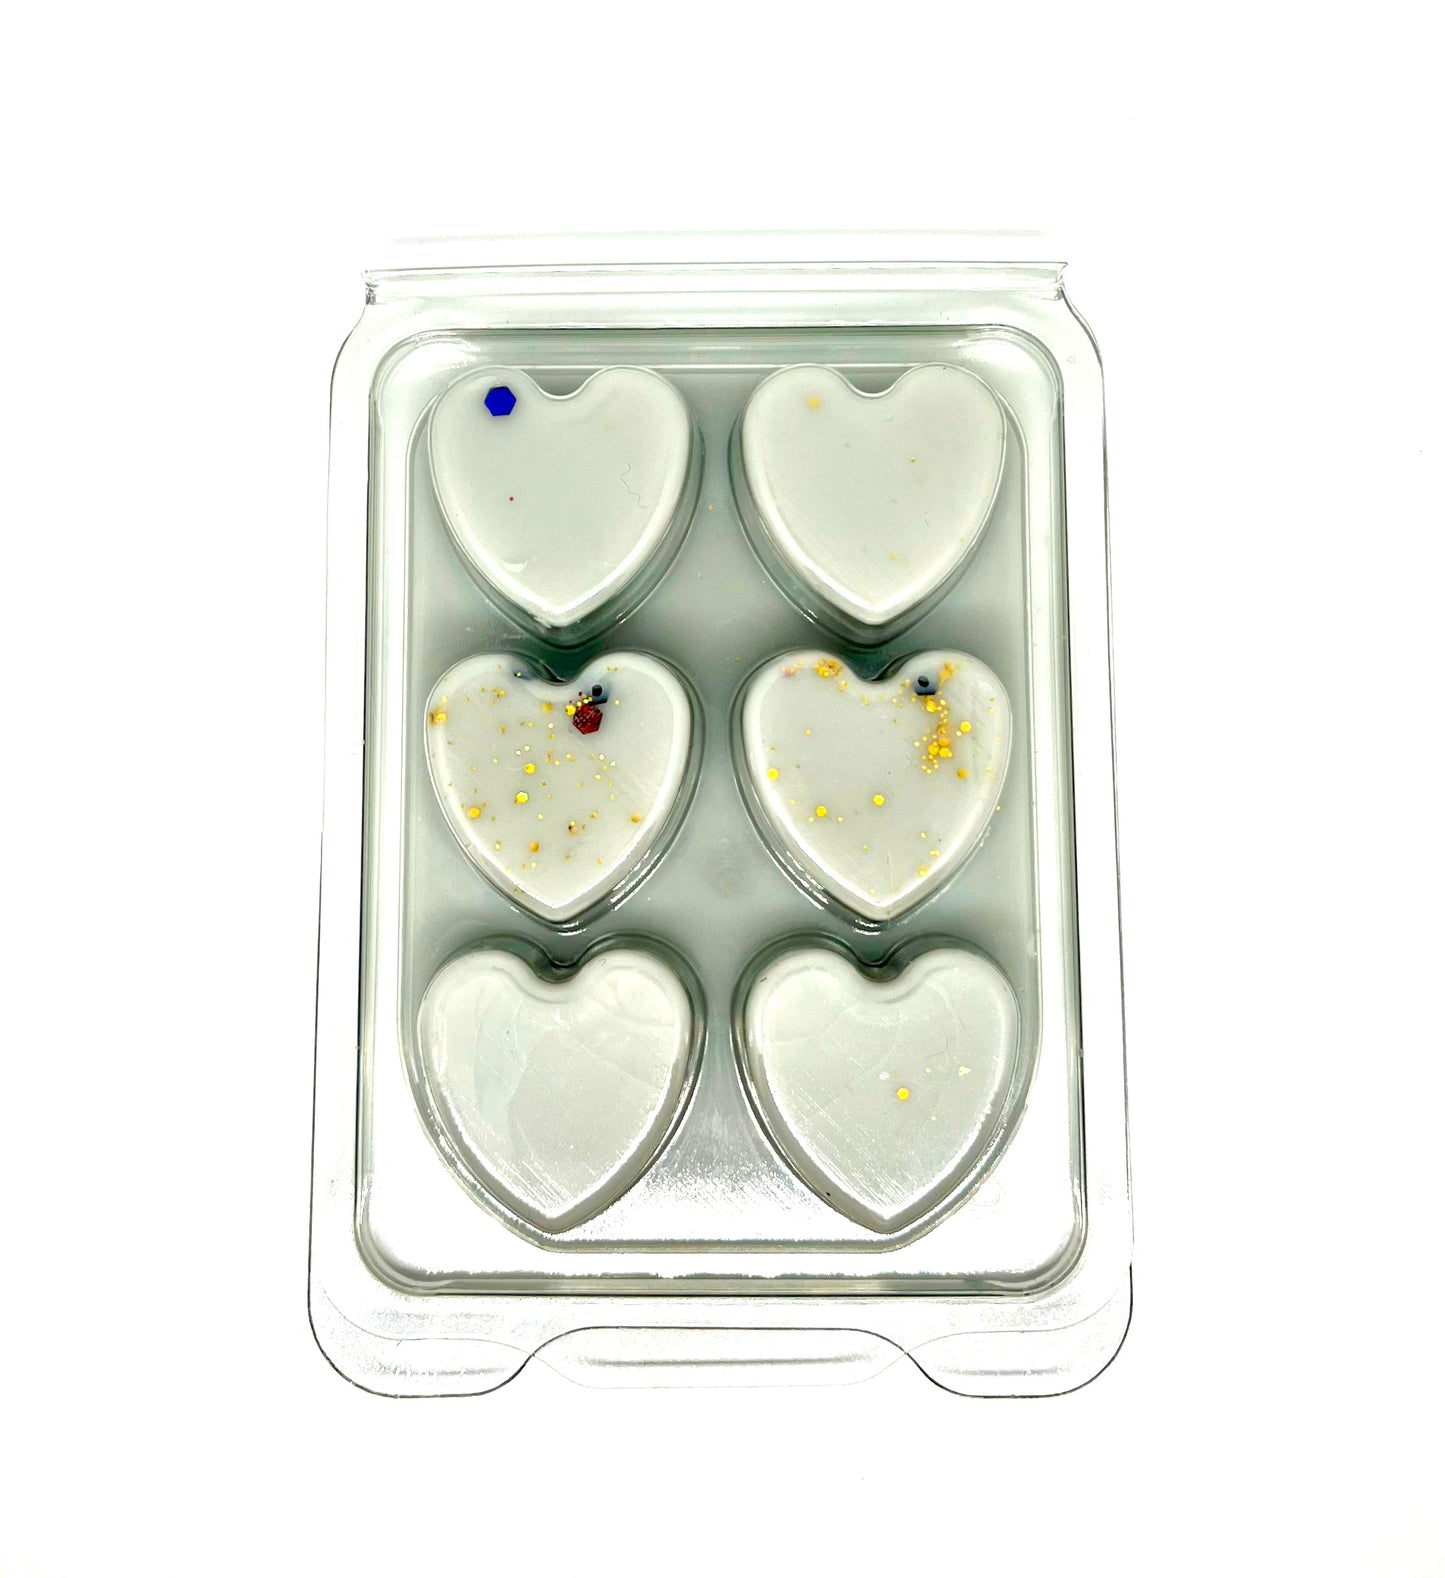 Tobacco Vanille Heart Clamshell Wax Melts - ScentiMelti  Tobacco Vanille Heart Clamshell Wax Melts